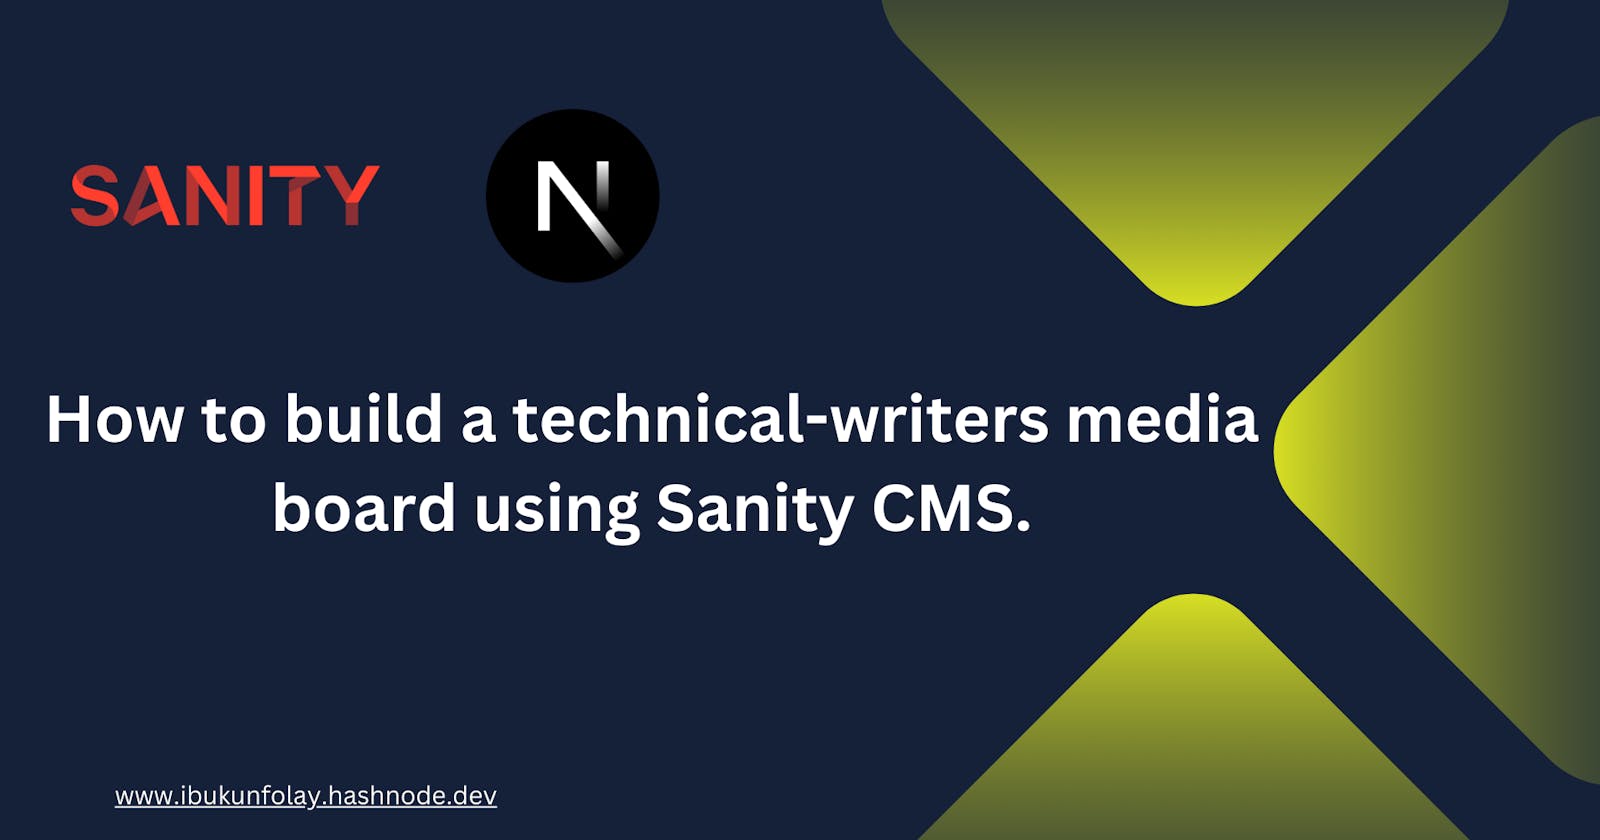 How to build a technical-writers media board using Sanity CMS.